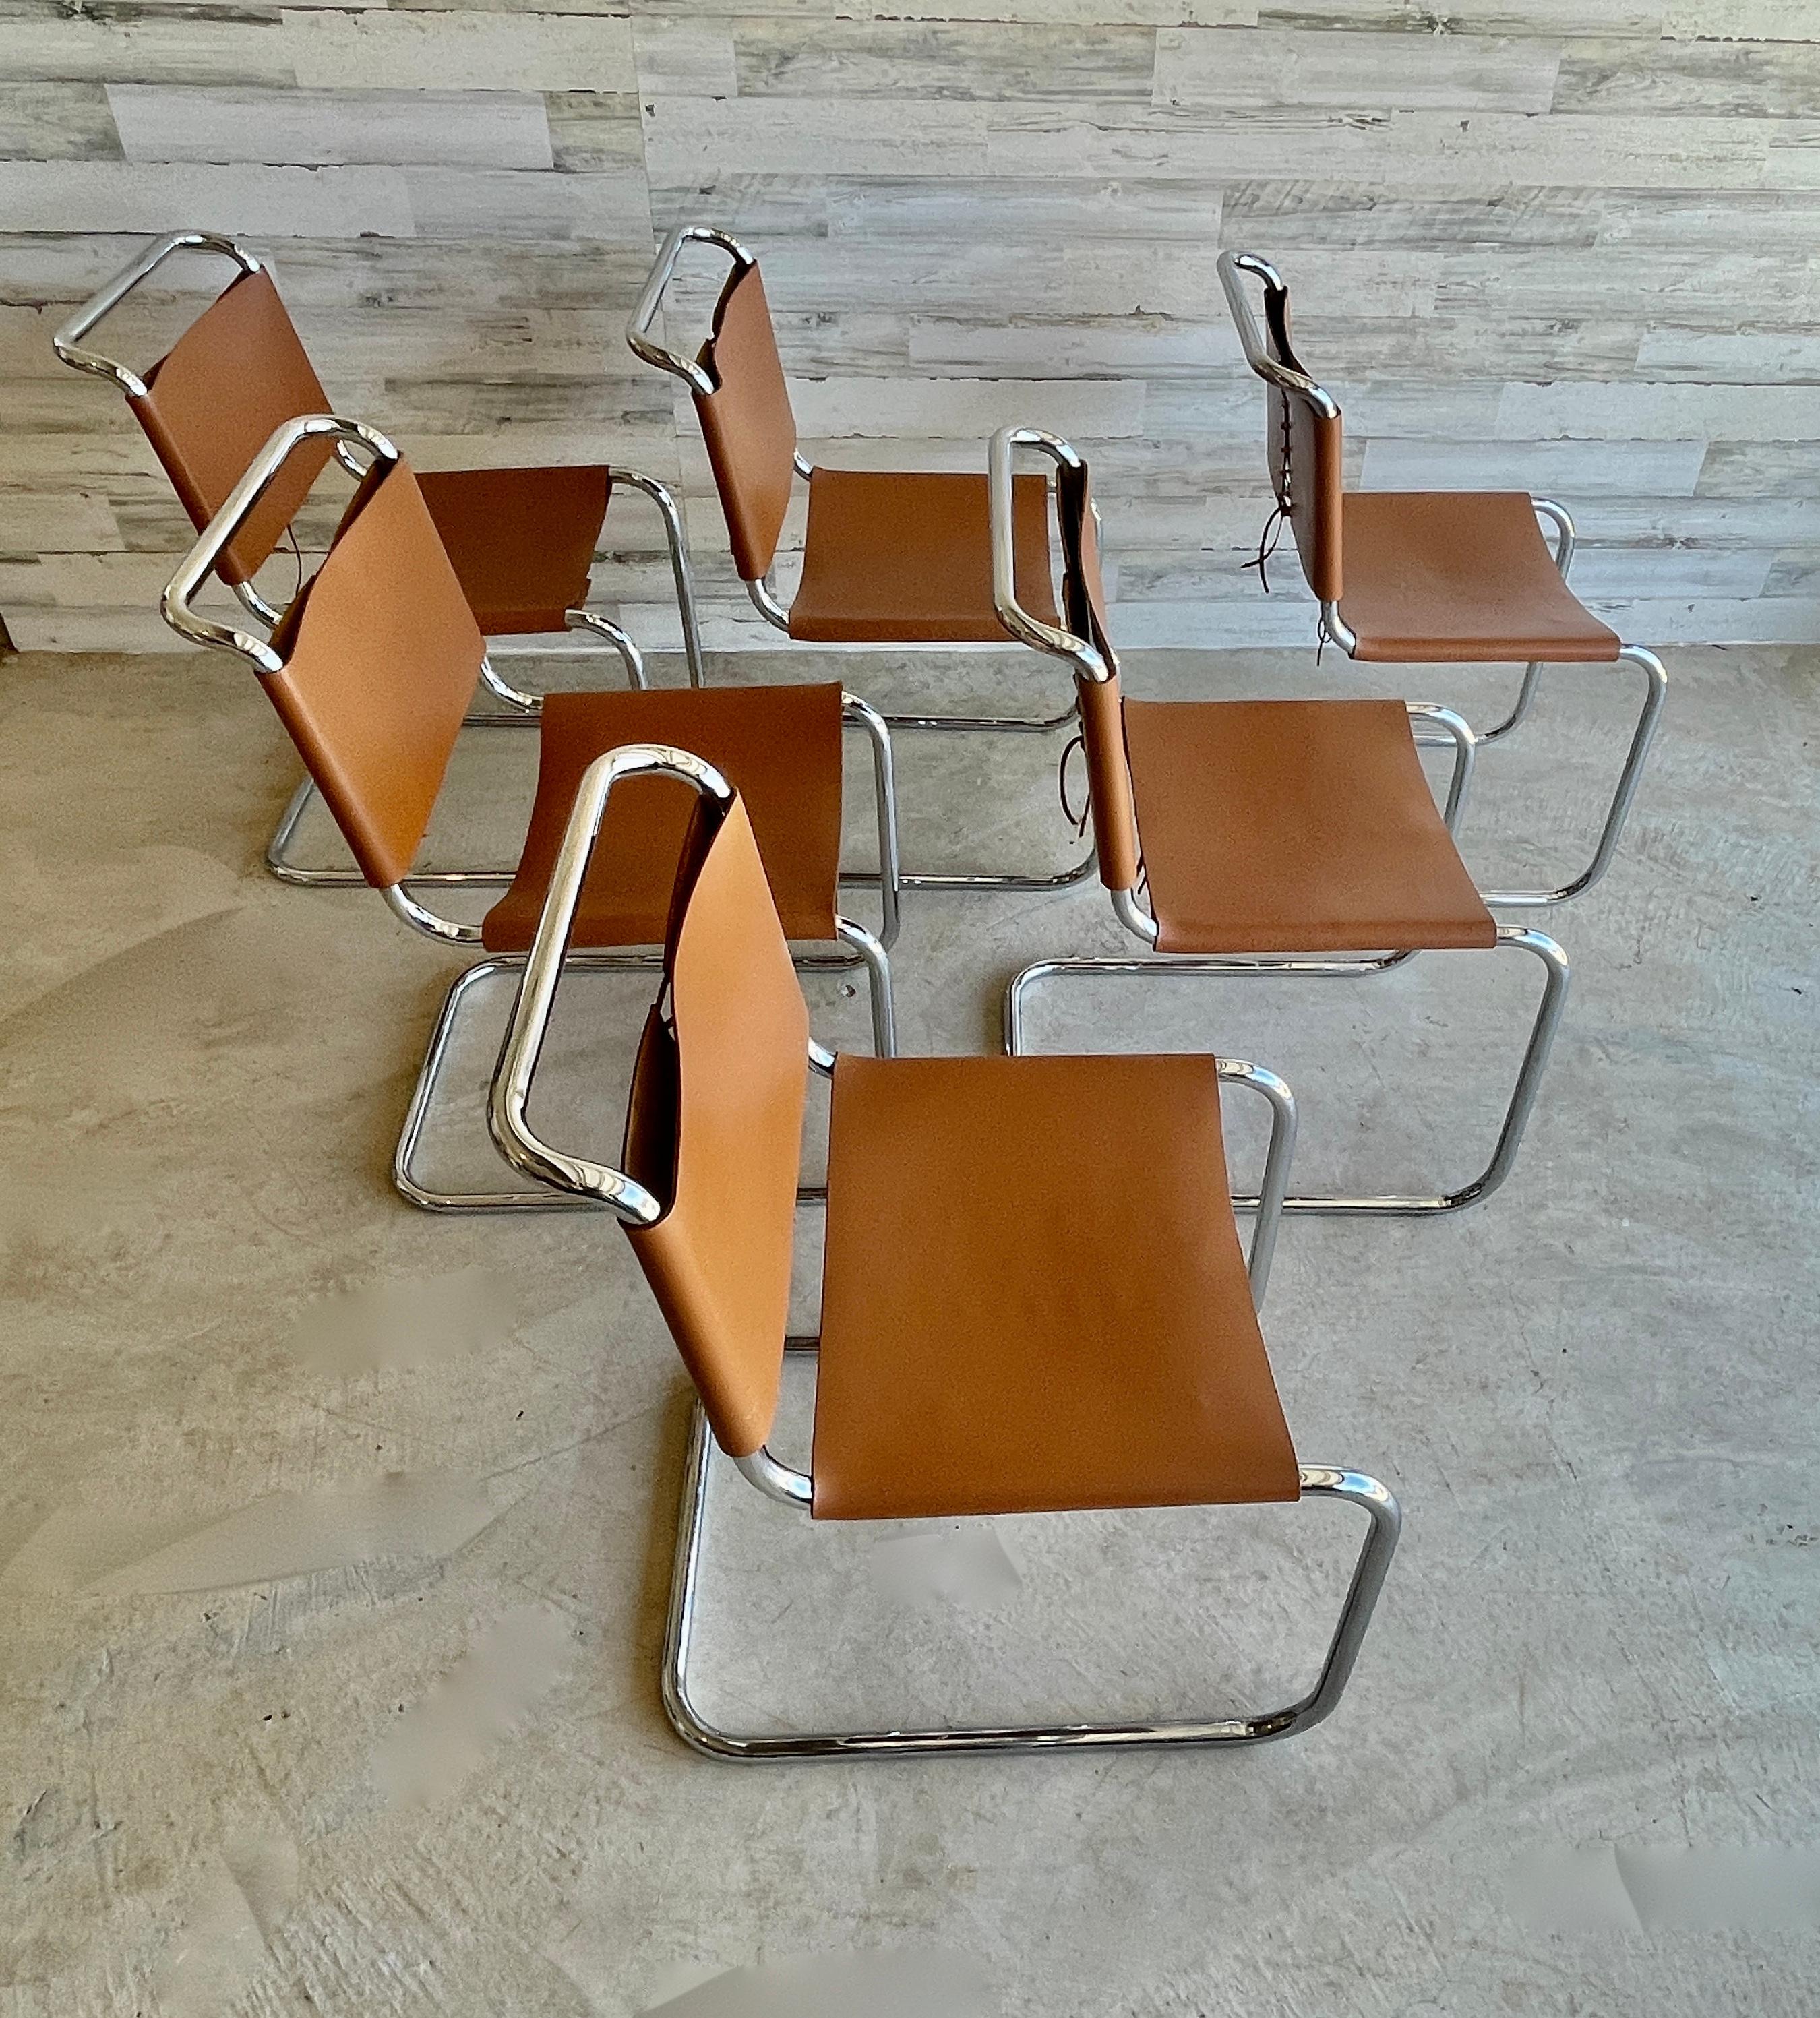 Mid-Century Modern Spoleto Dining Chairs Attributed to Knoll